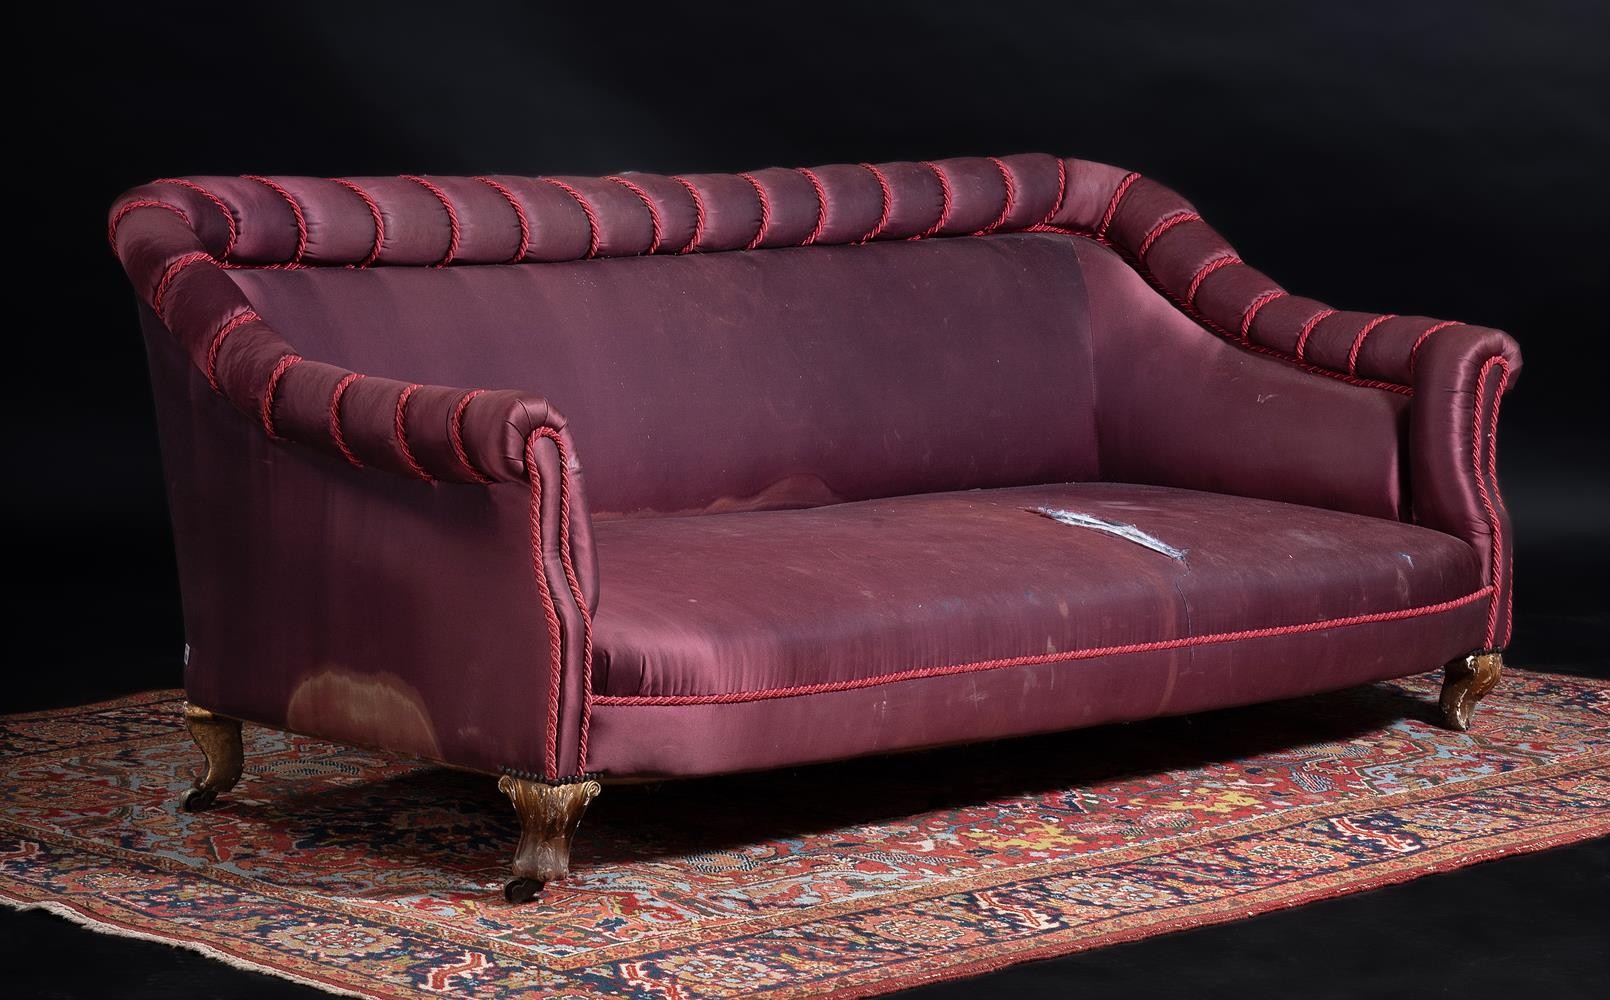 An early Victorian giltwood and upholstered sofa, c.1840, by Hampton & Sons, Pall Mall, with stamped